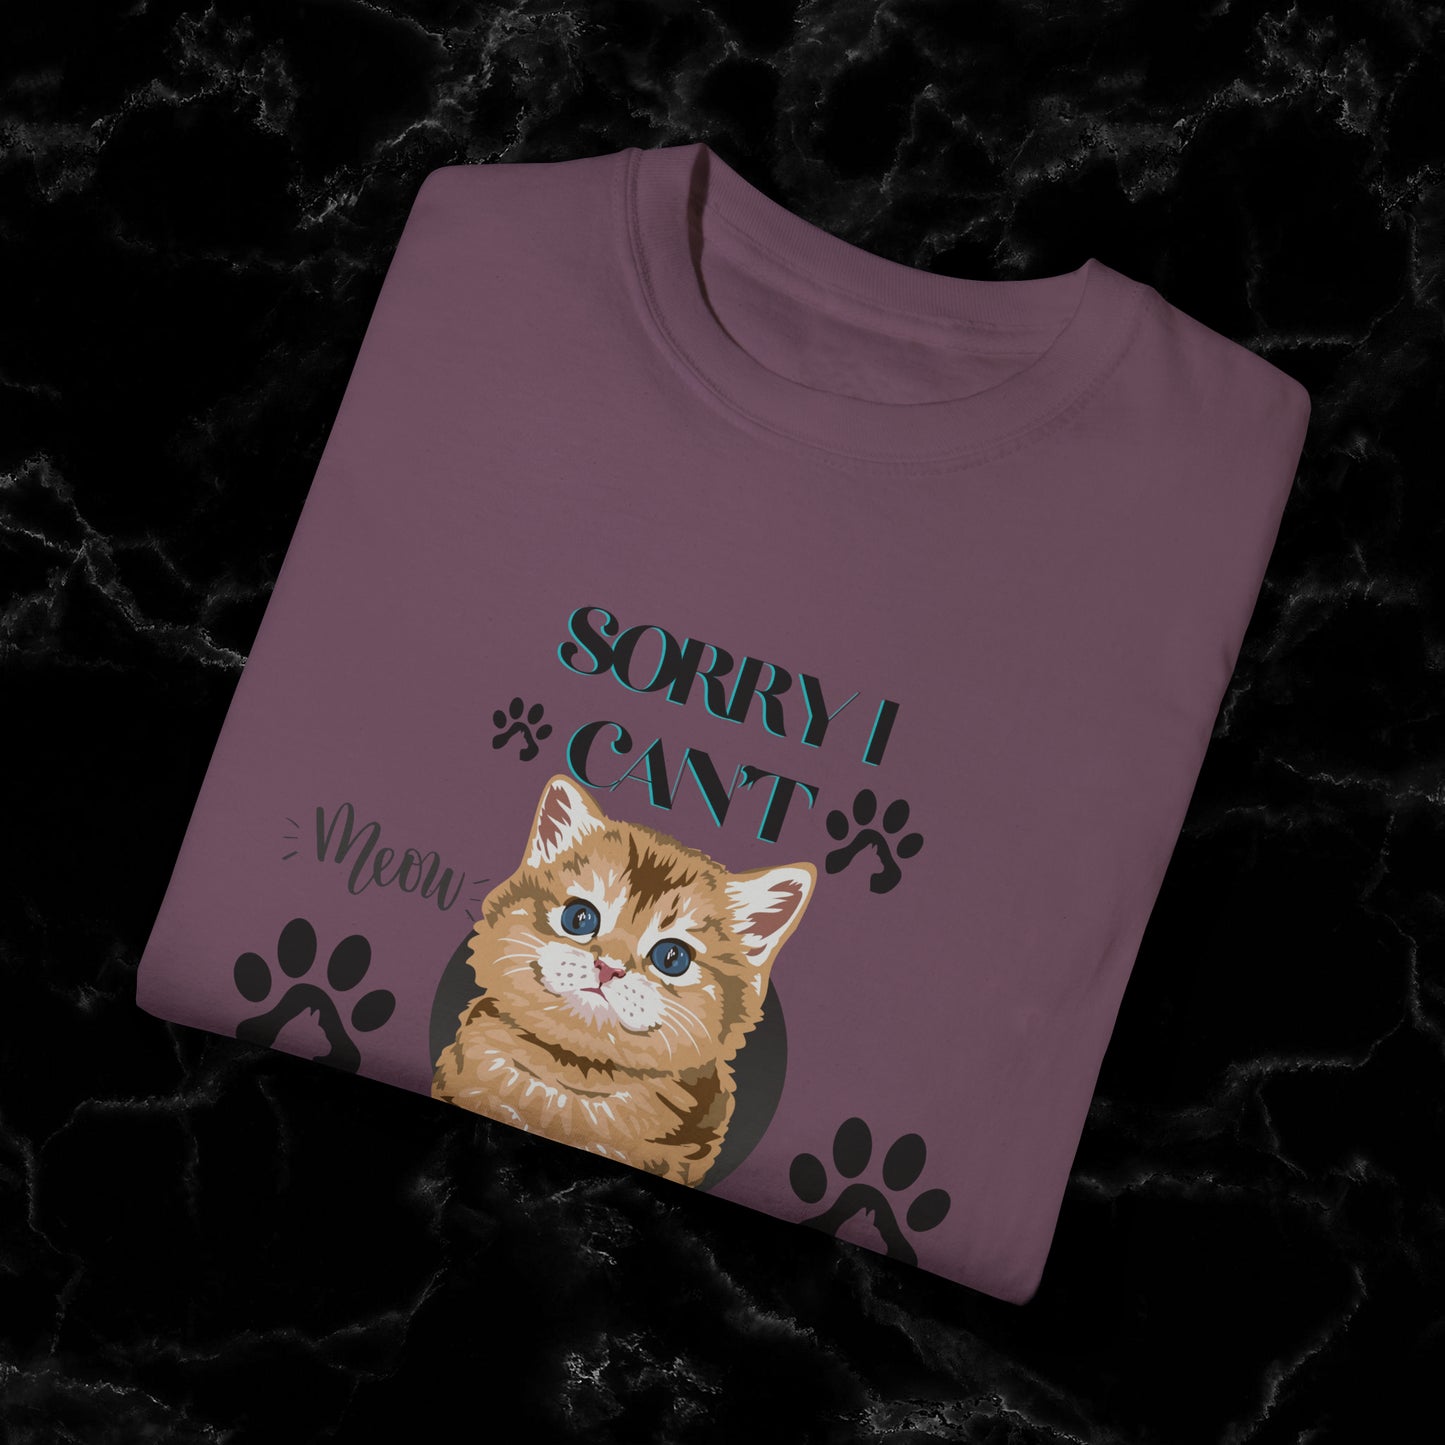 Sorry I Can't, My Cat Needs Me T-Shirt - Perfect Gift for Cat Moms and Animal Lovers T-Shirt   